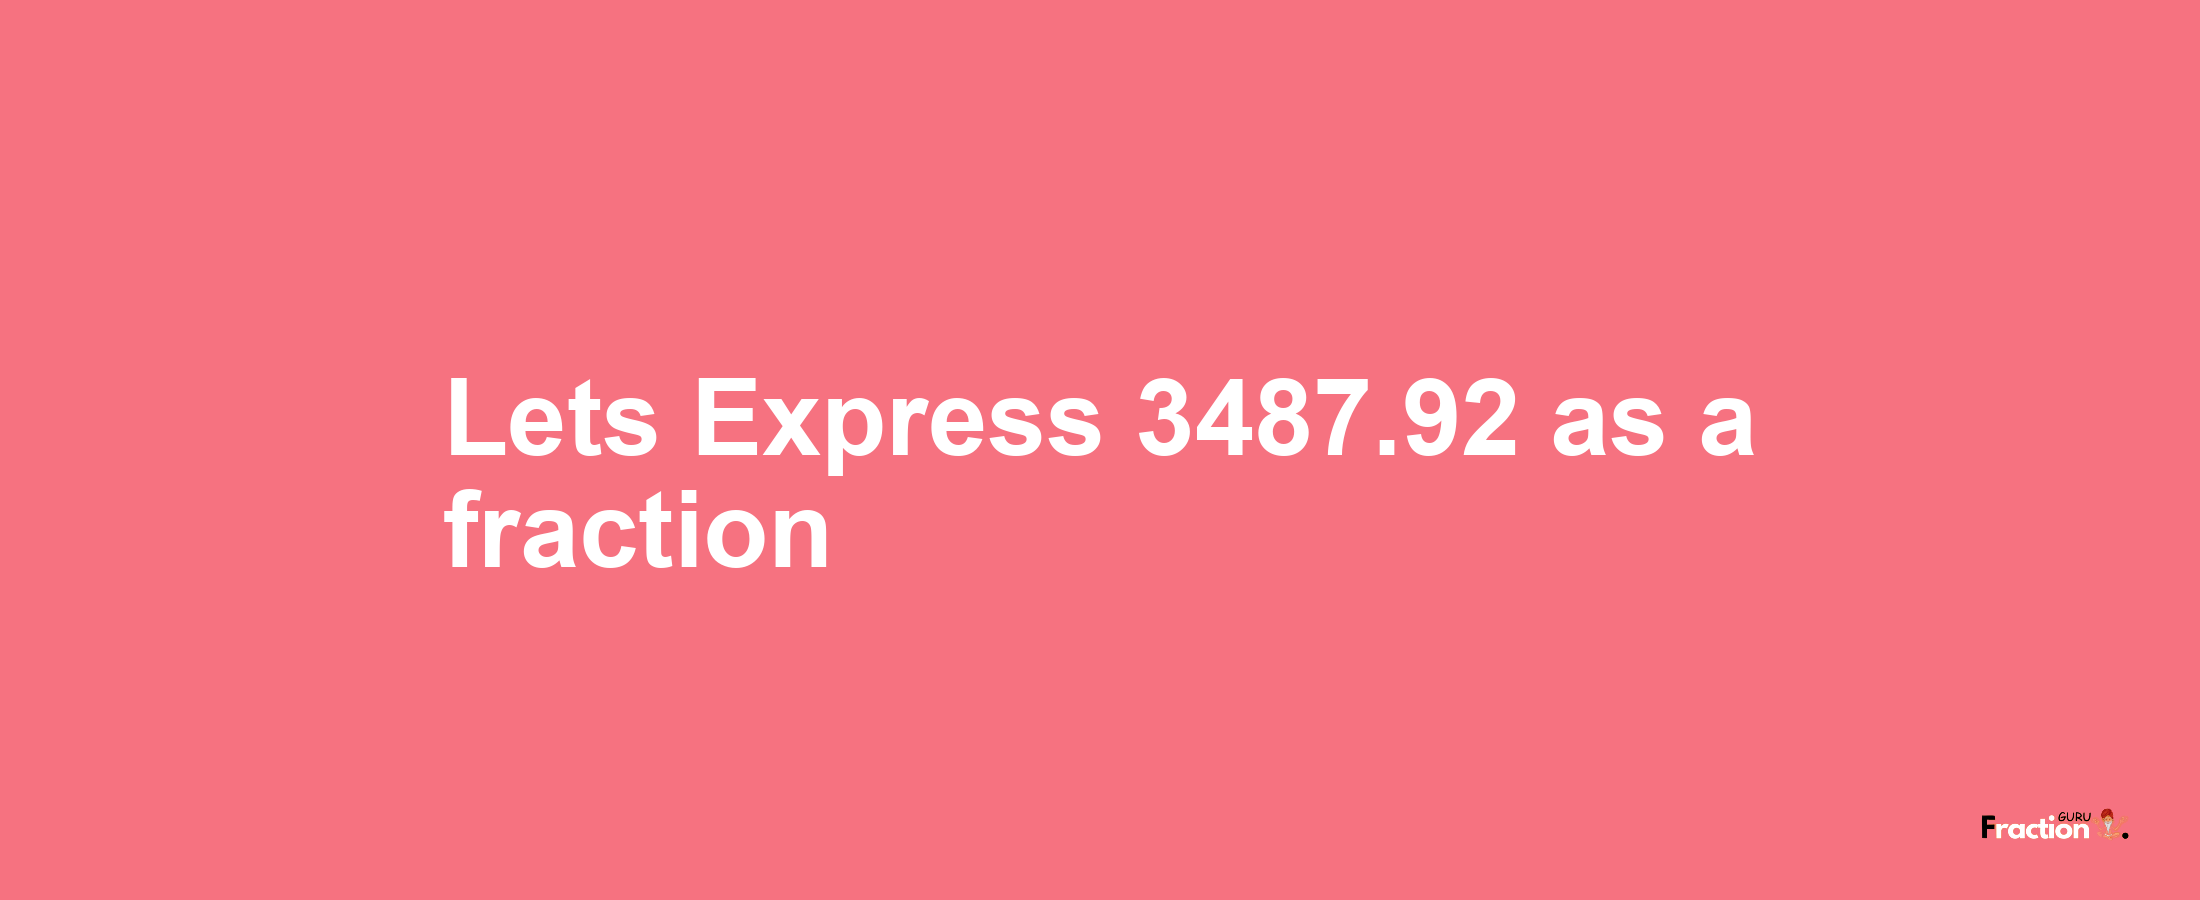 Lets Express 3487.92 as afraction